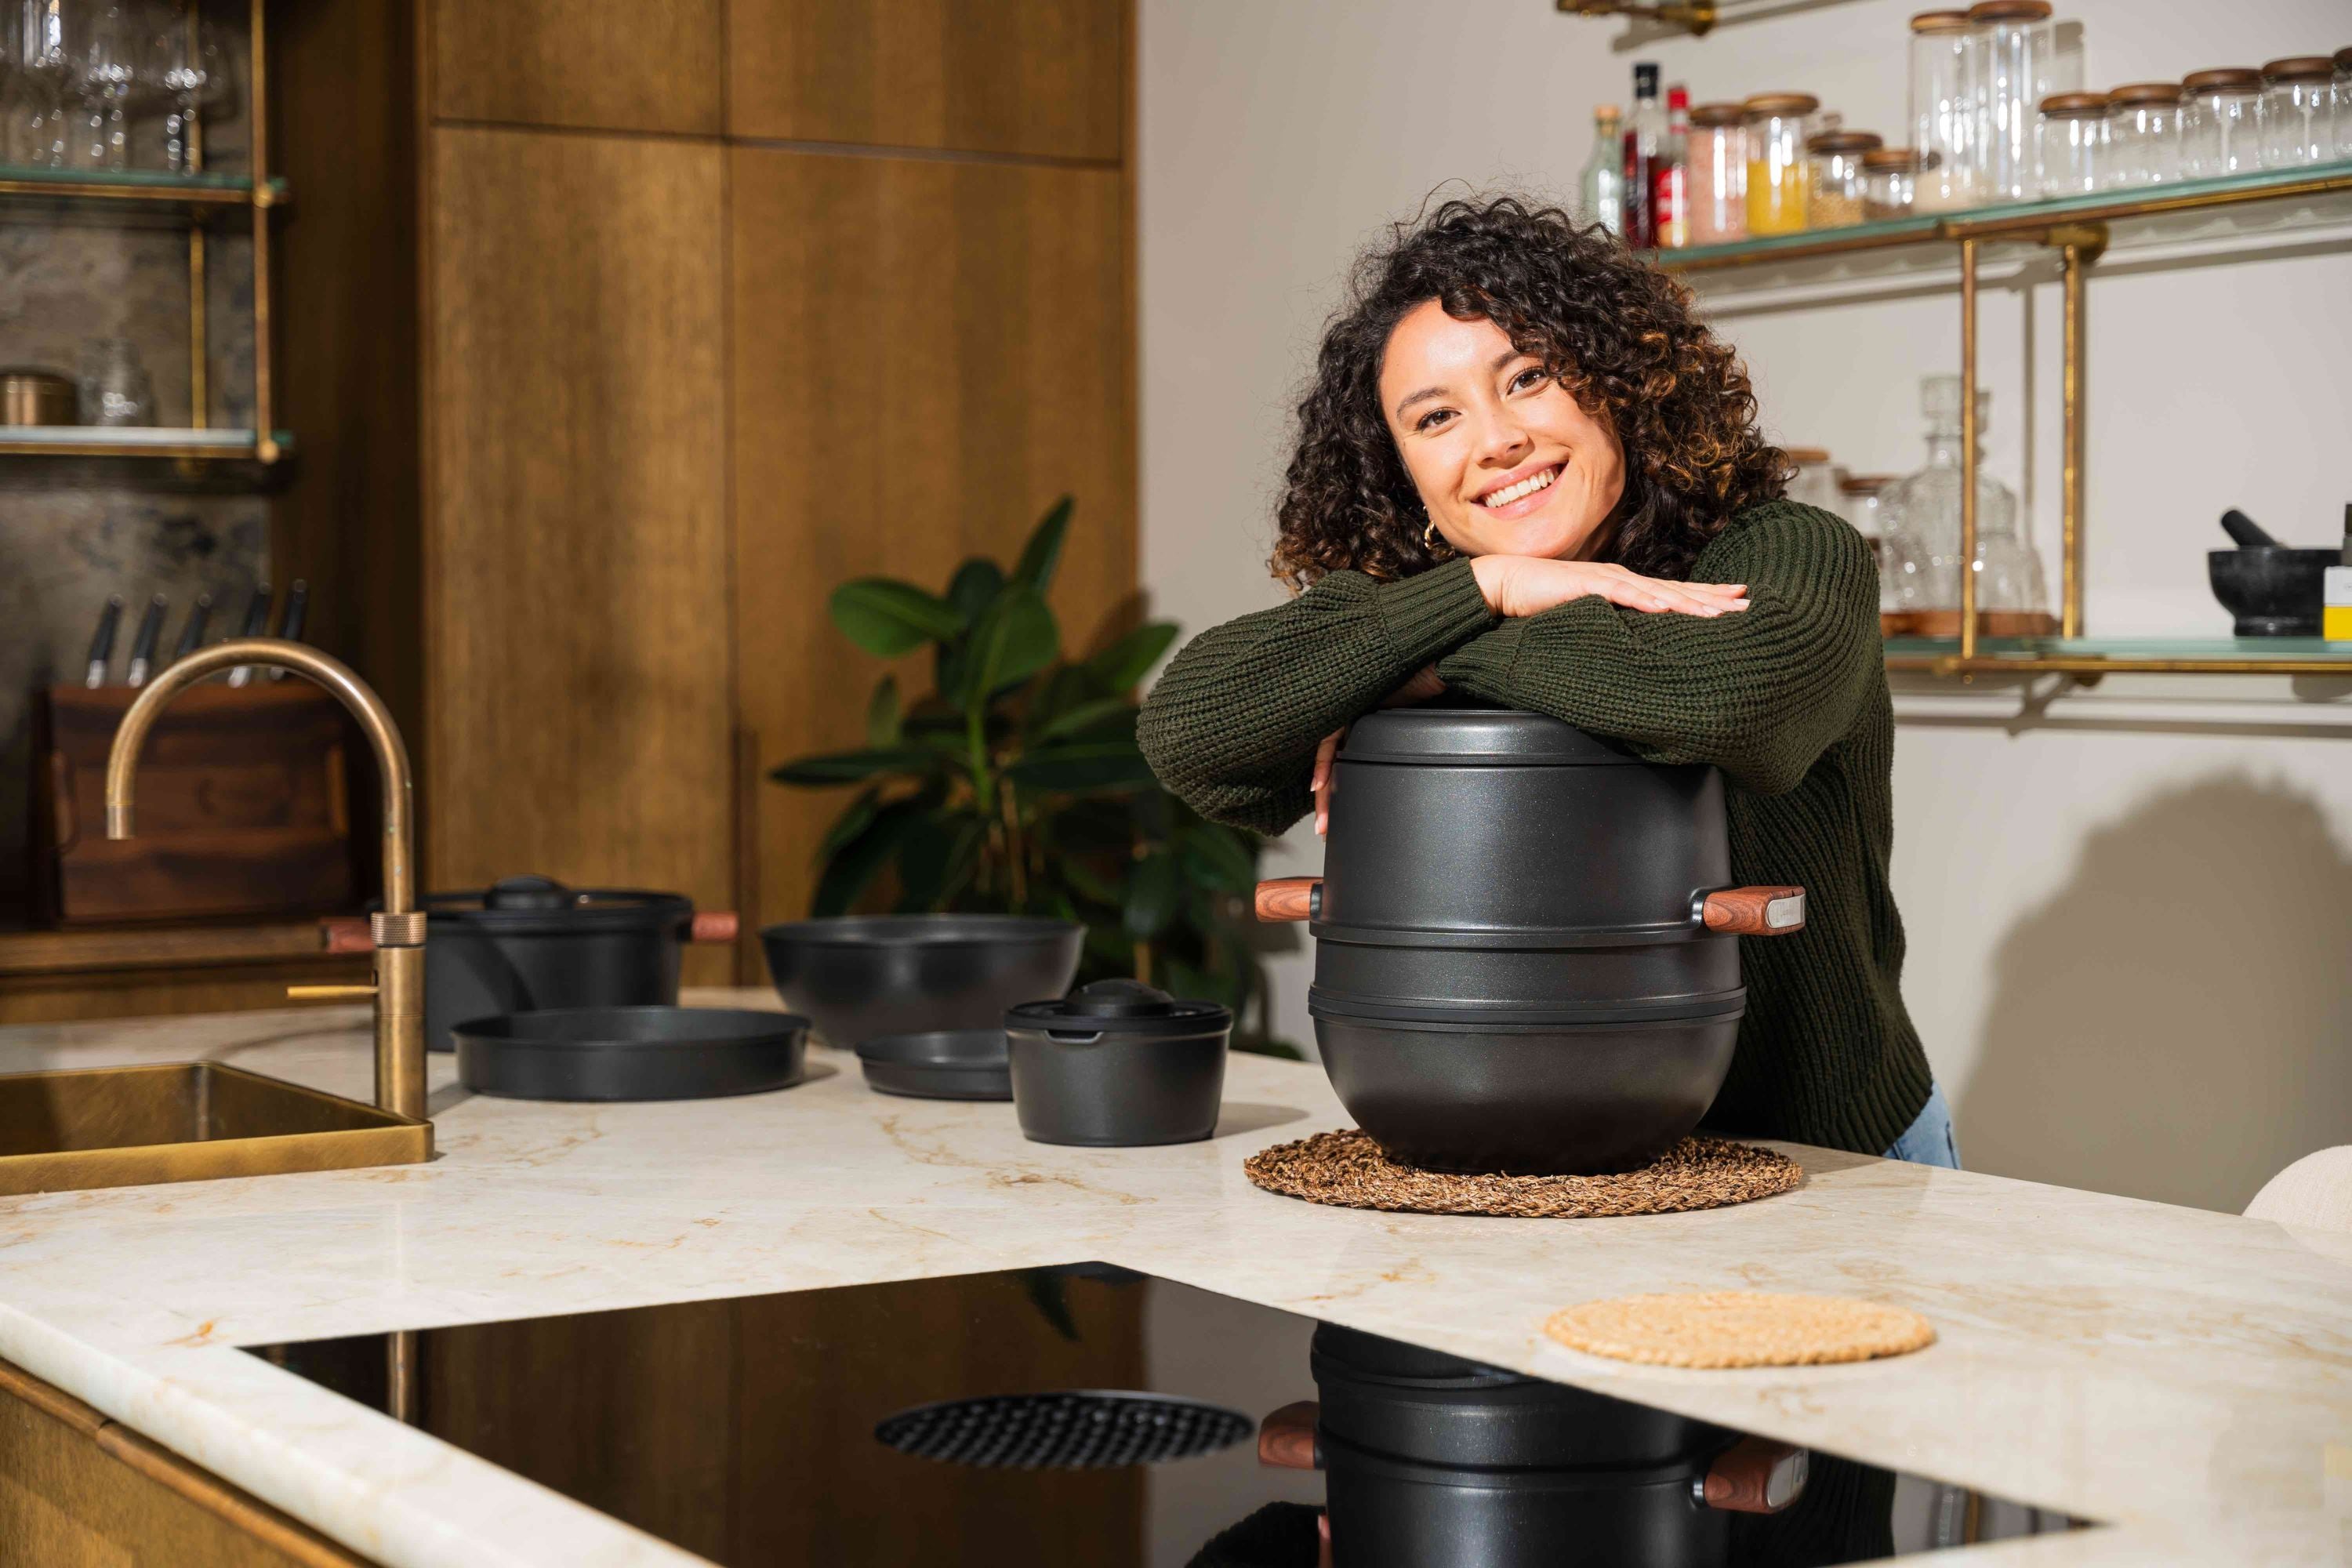 Cooking Totem - Modern Stackable Cookware Set for Small Space Kitchen -  Tuvie Design